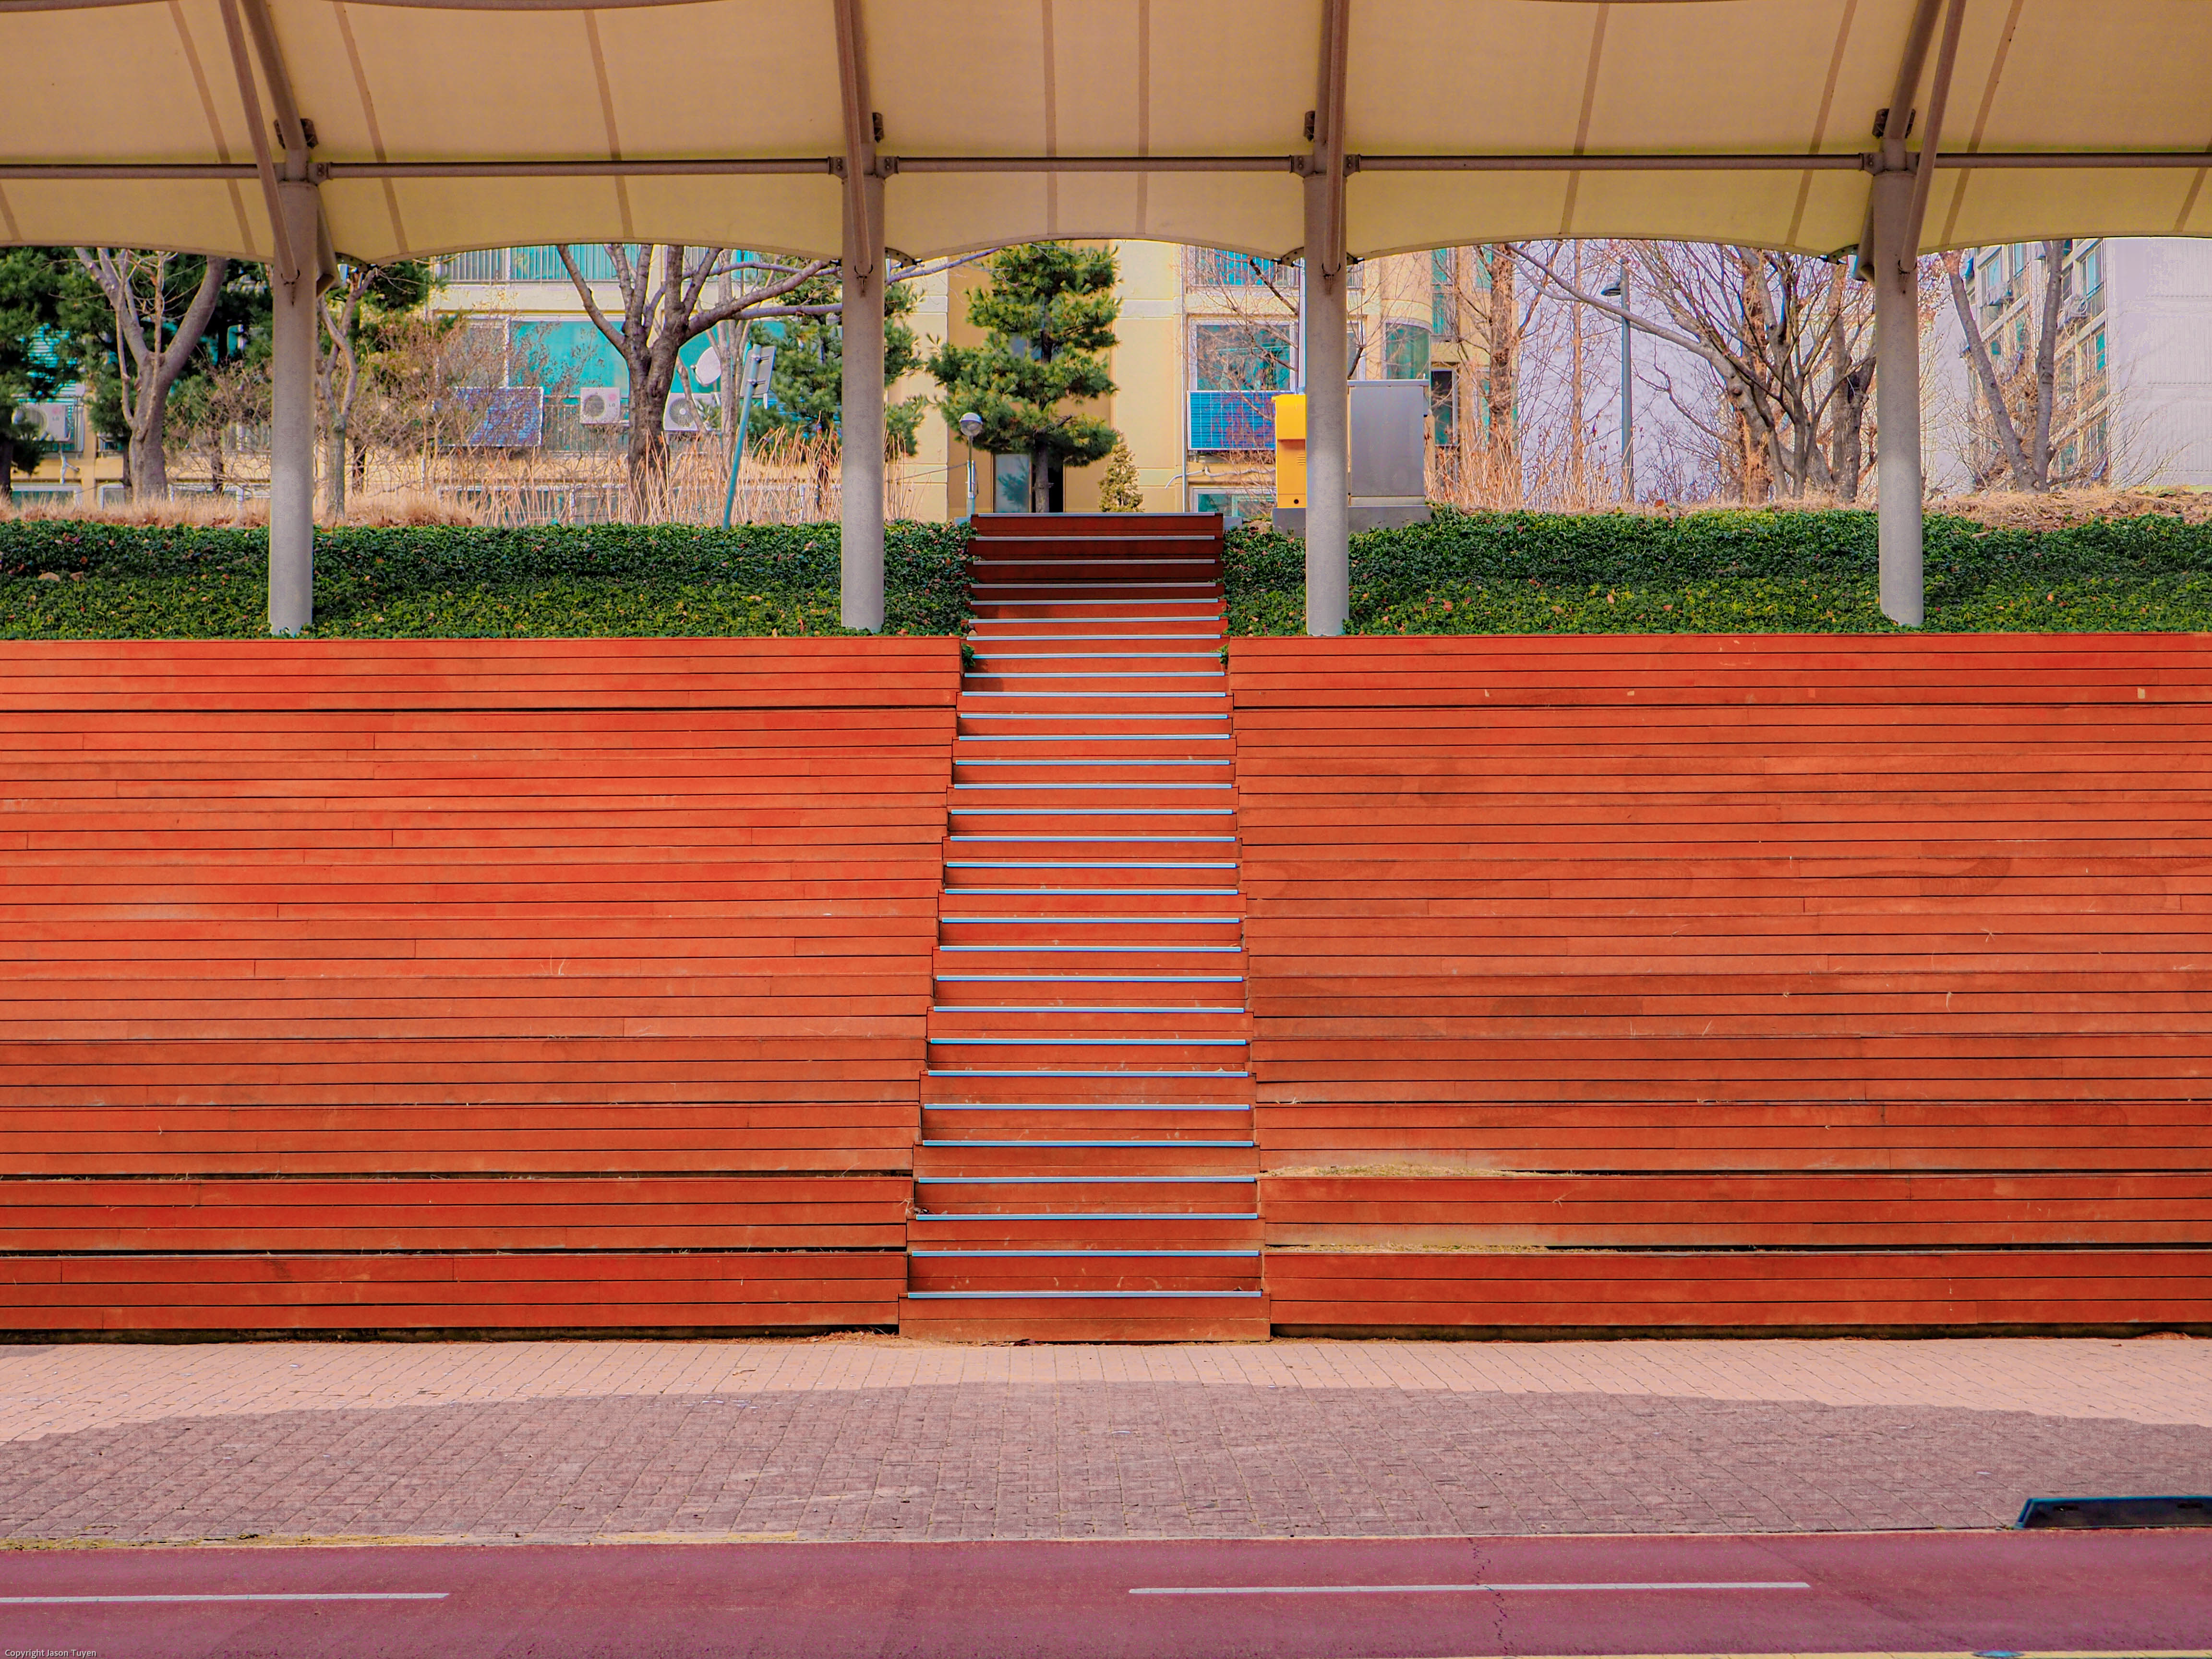 Red outdoor stadium seats located in a Seoul park.